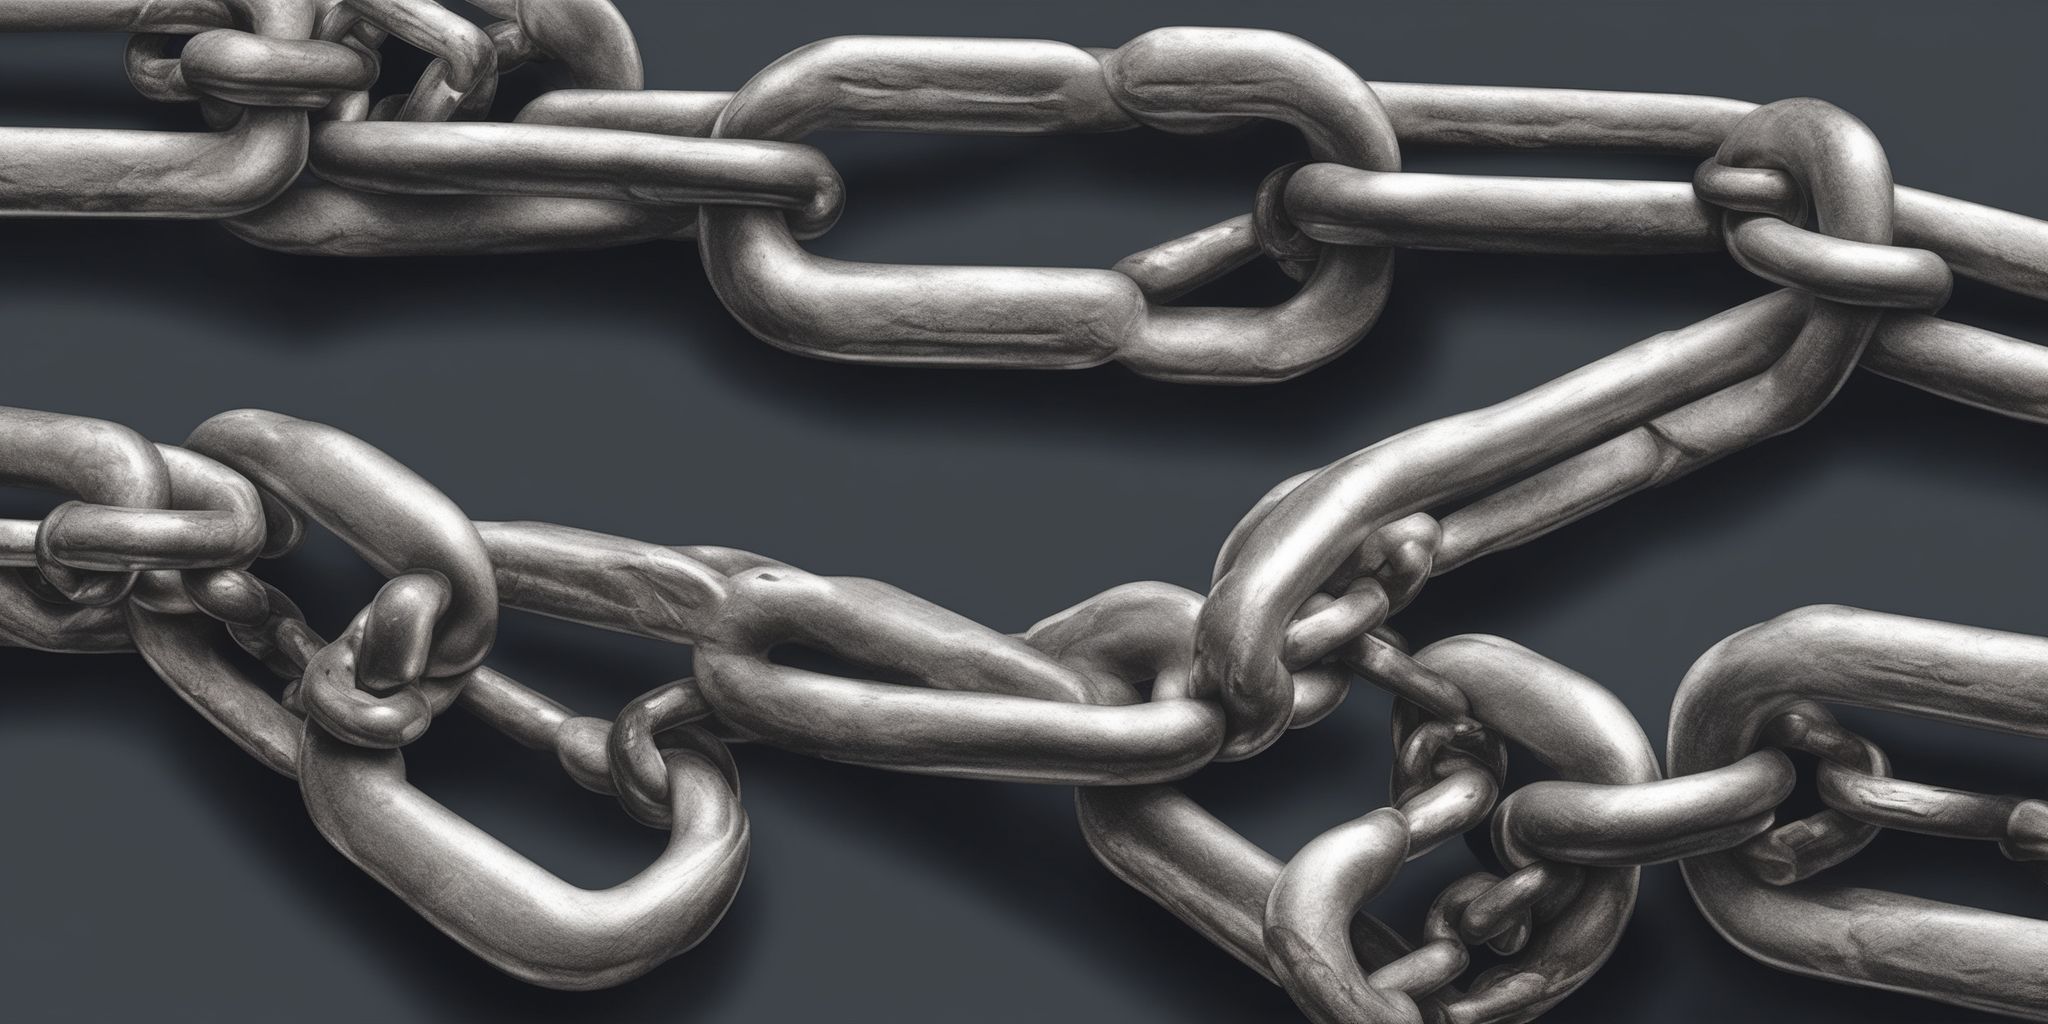 Chain  in realistic, photographic style